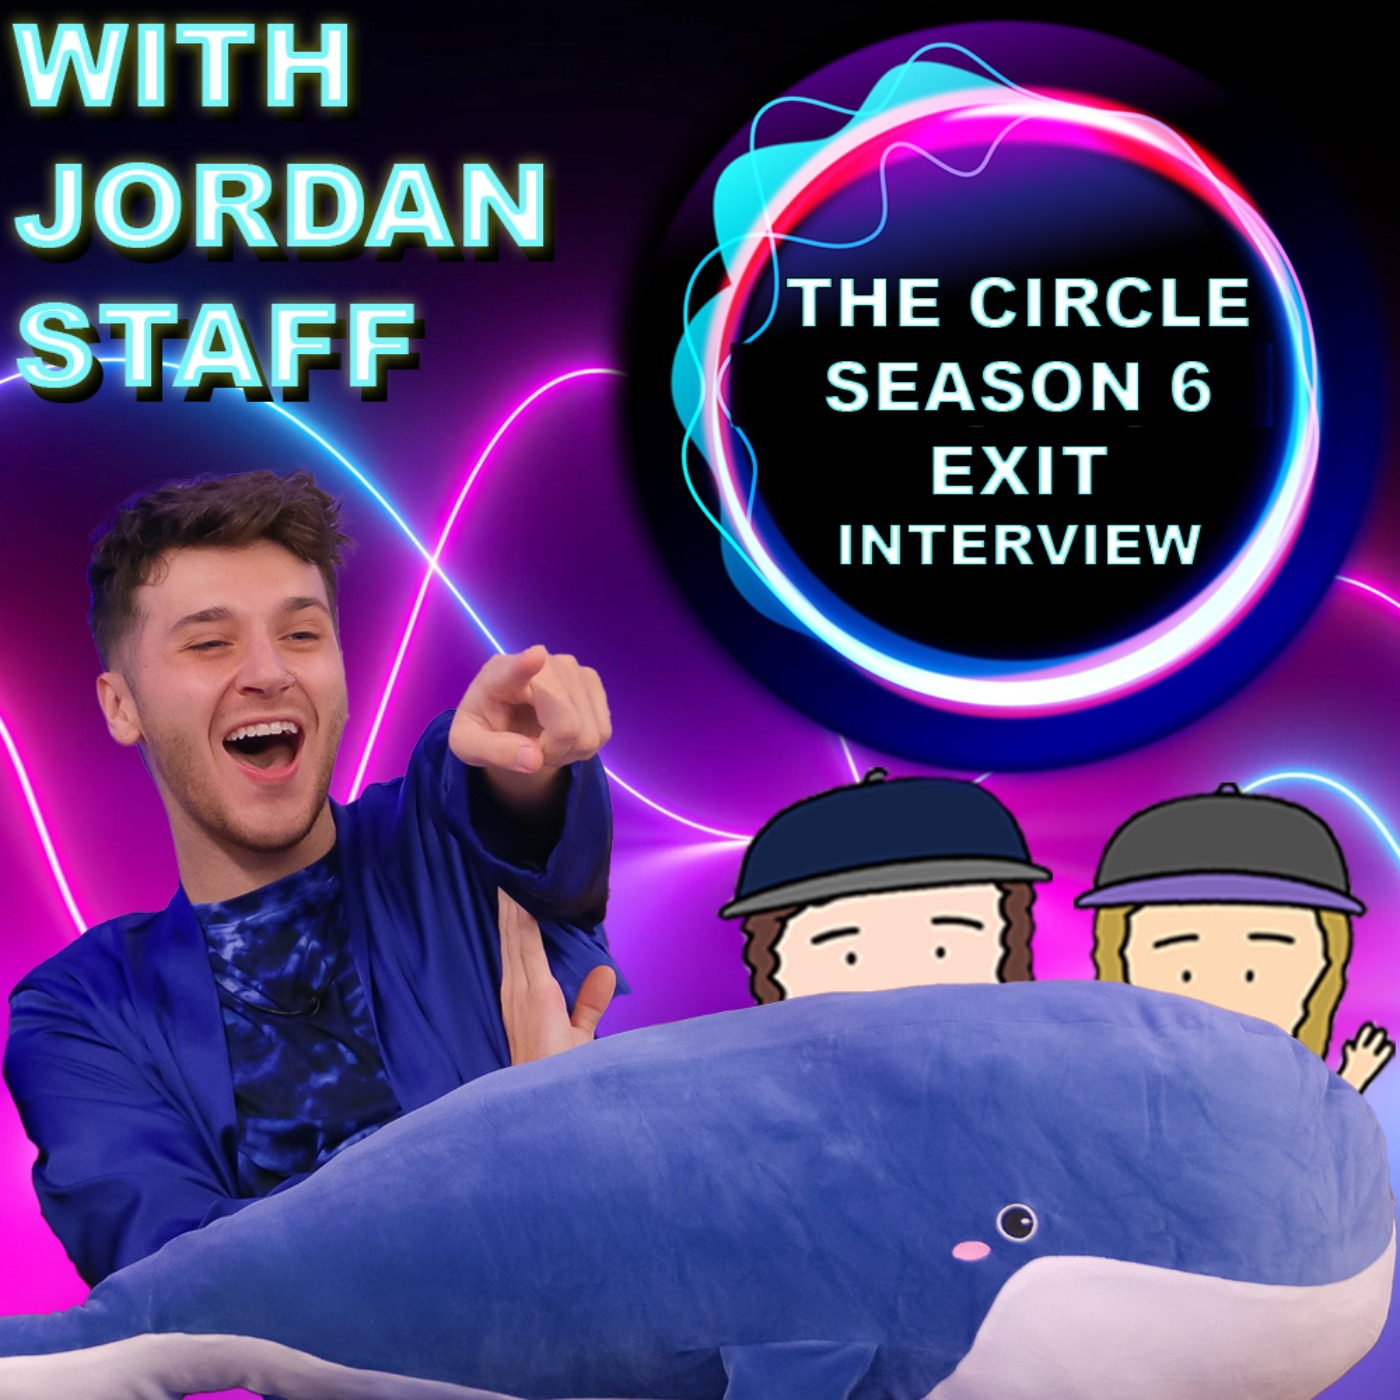 The Circle Season 6 Exit Interview With Jordan Staff